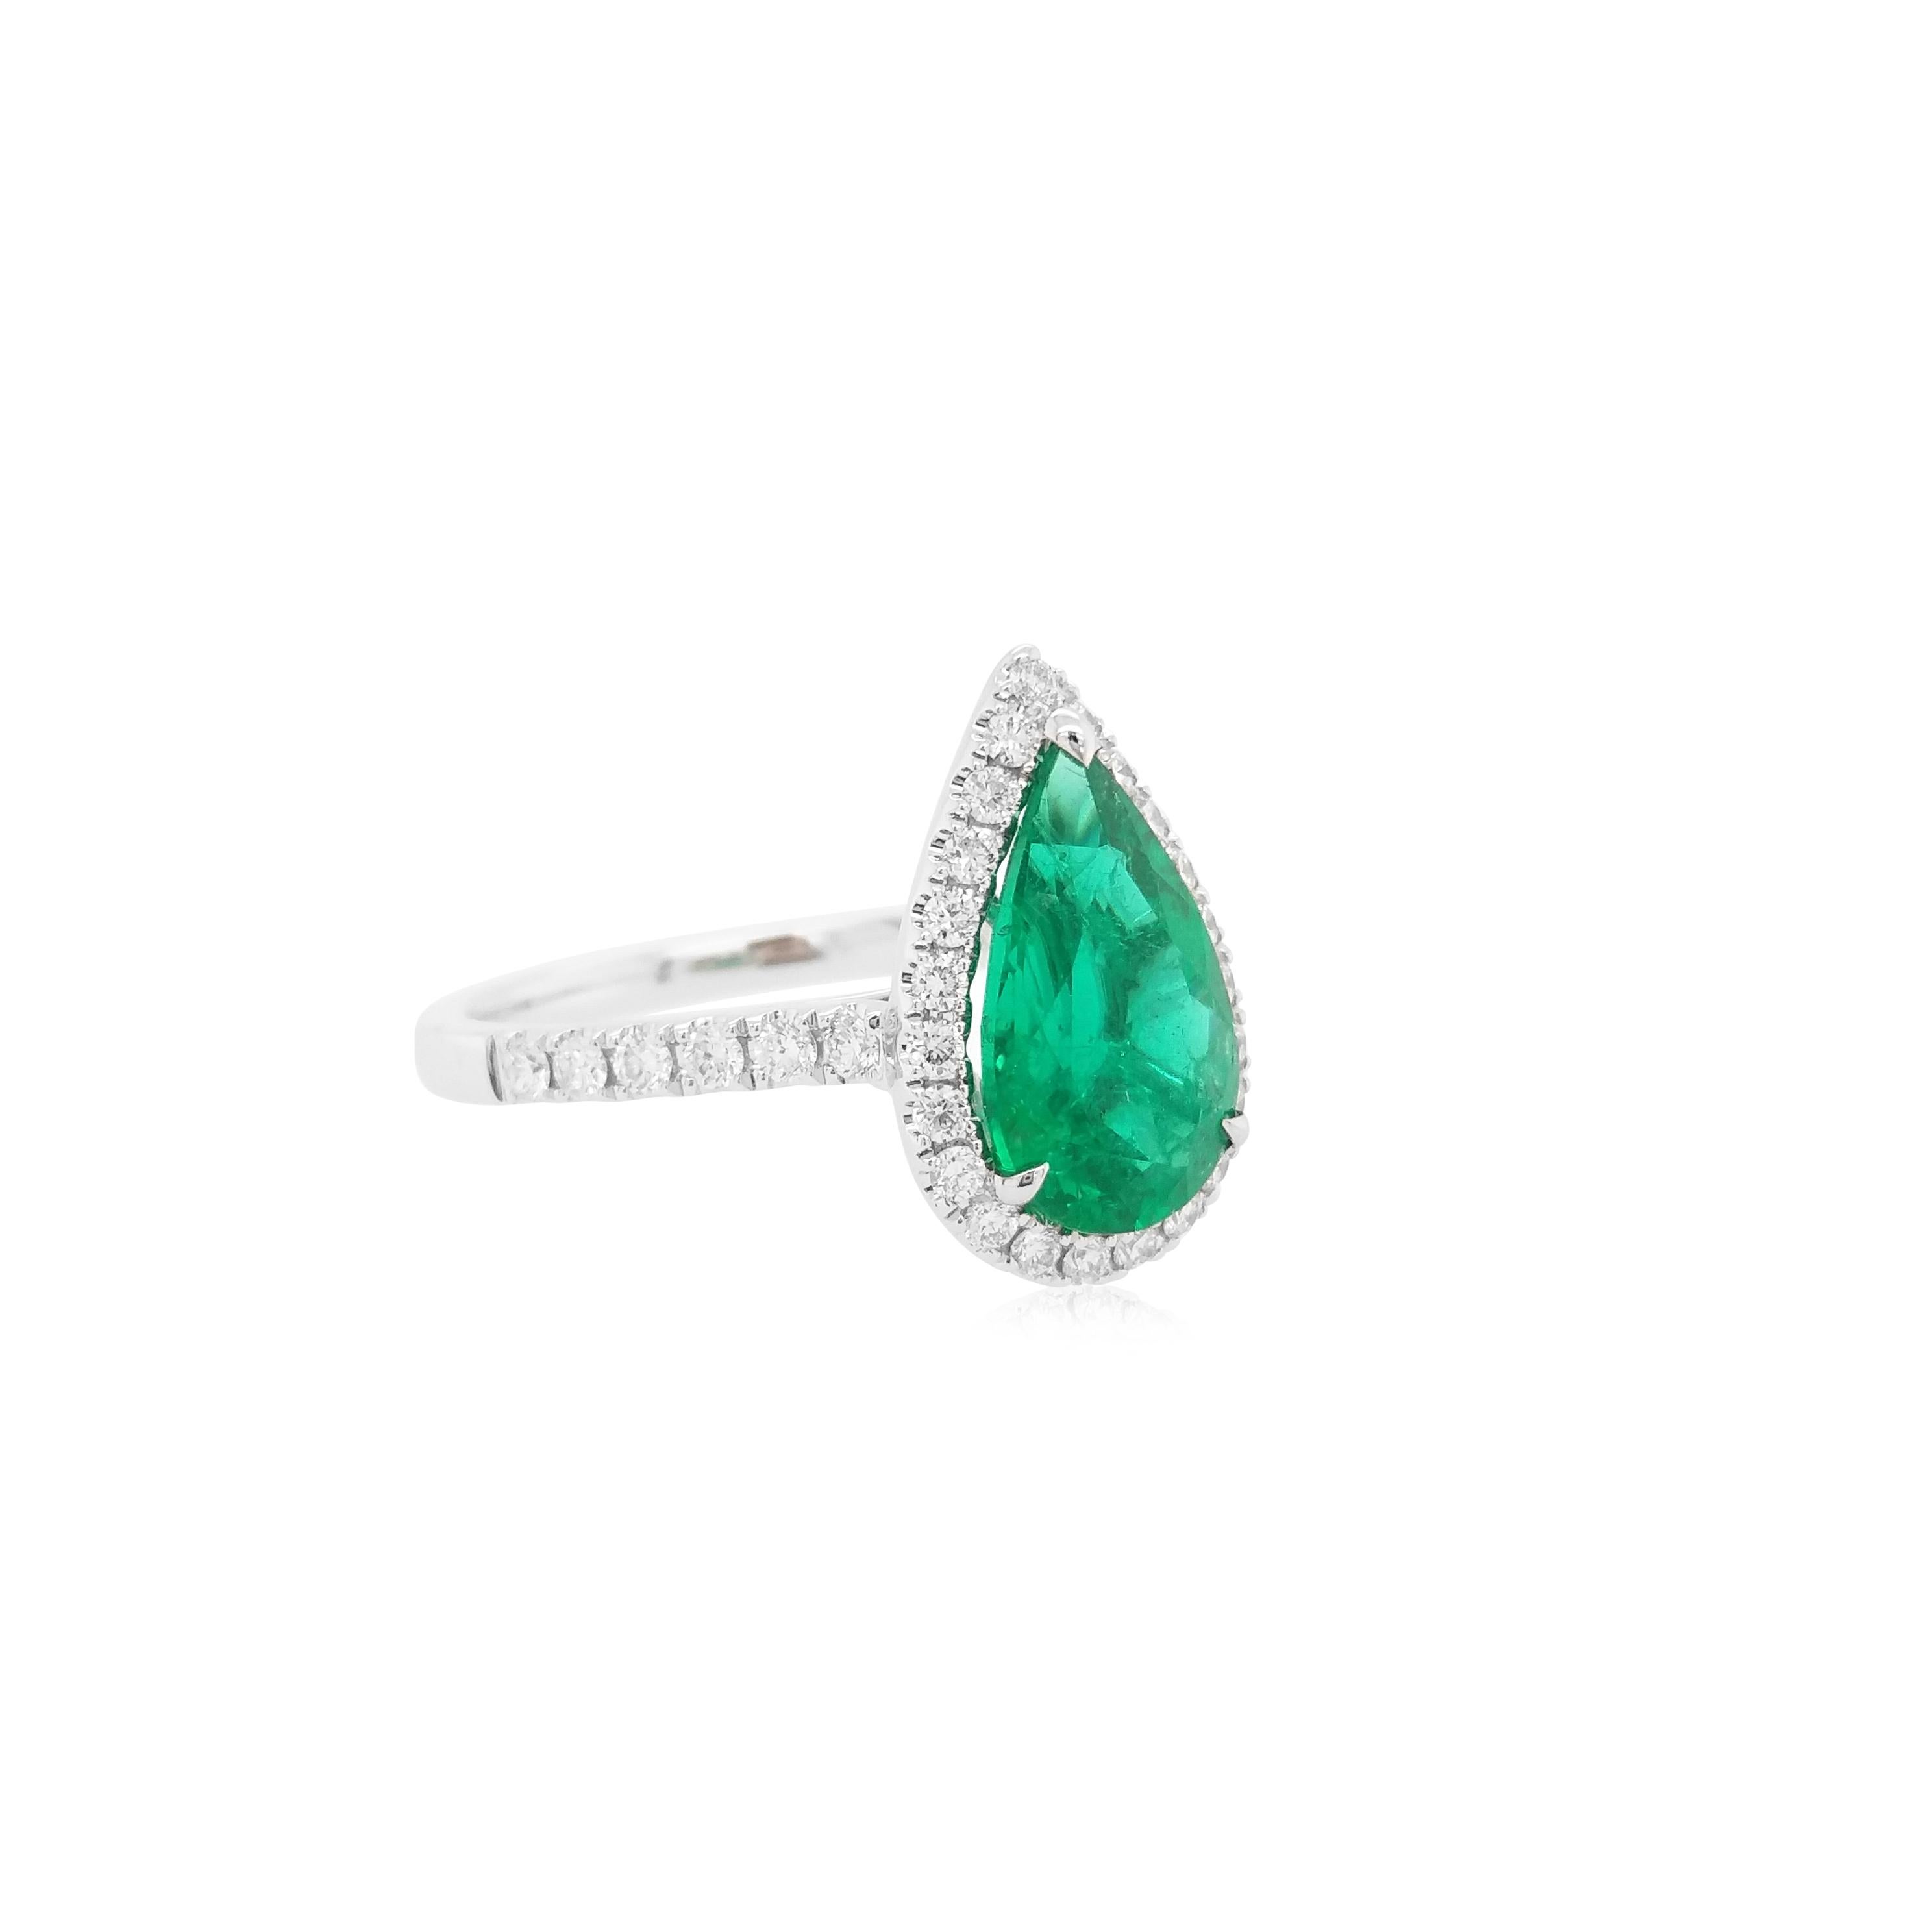 Pear Cut Certified Colombian Emerald White Diamond 18K Gold Engagement Ring